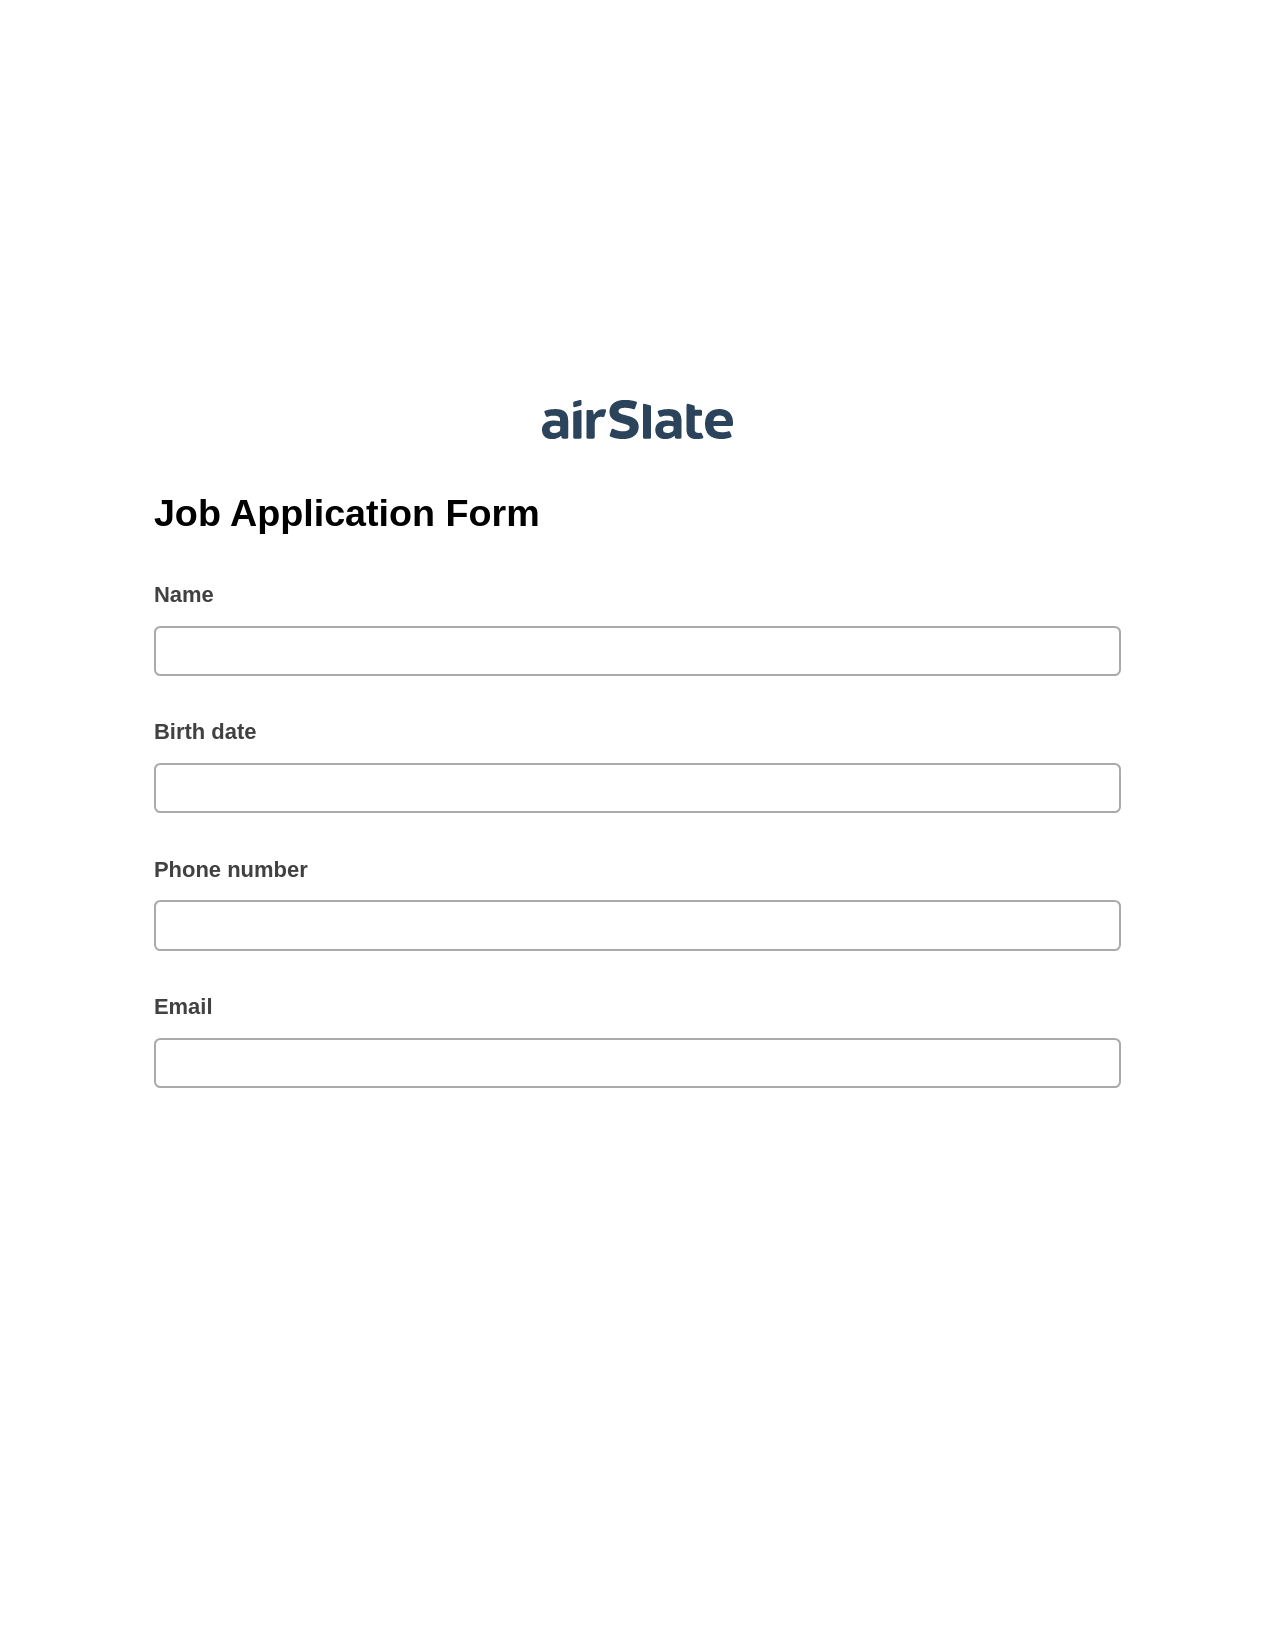 Multirole Job Application Form Pre-fill from Excel Spreadsheet Dropdown Options Bot, Pre-fill with Custom Data Bot, Post-finish Document Bot